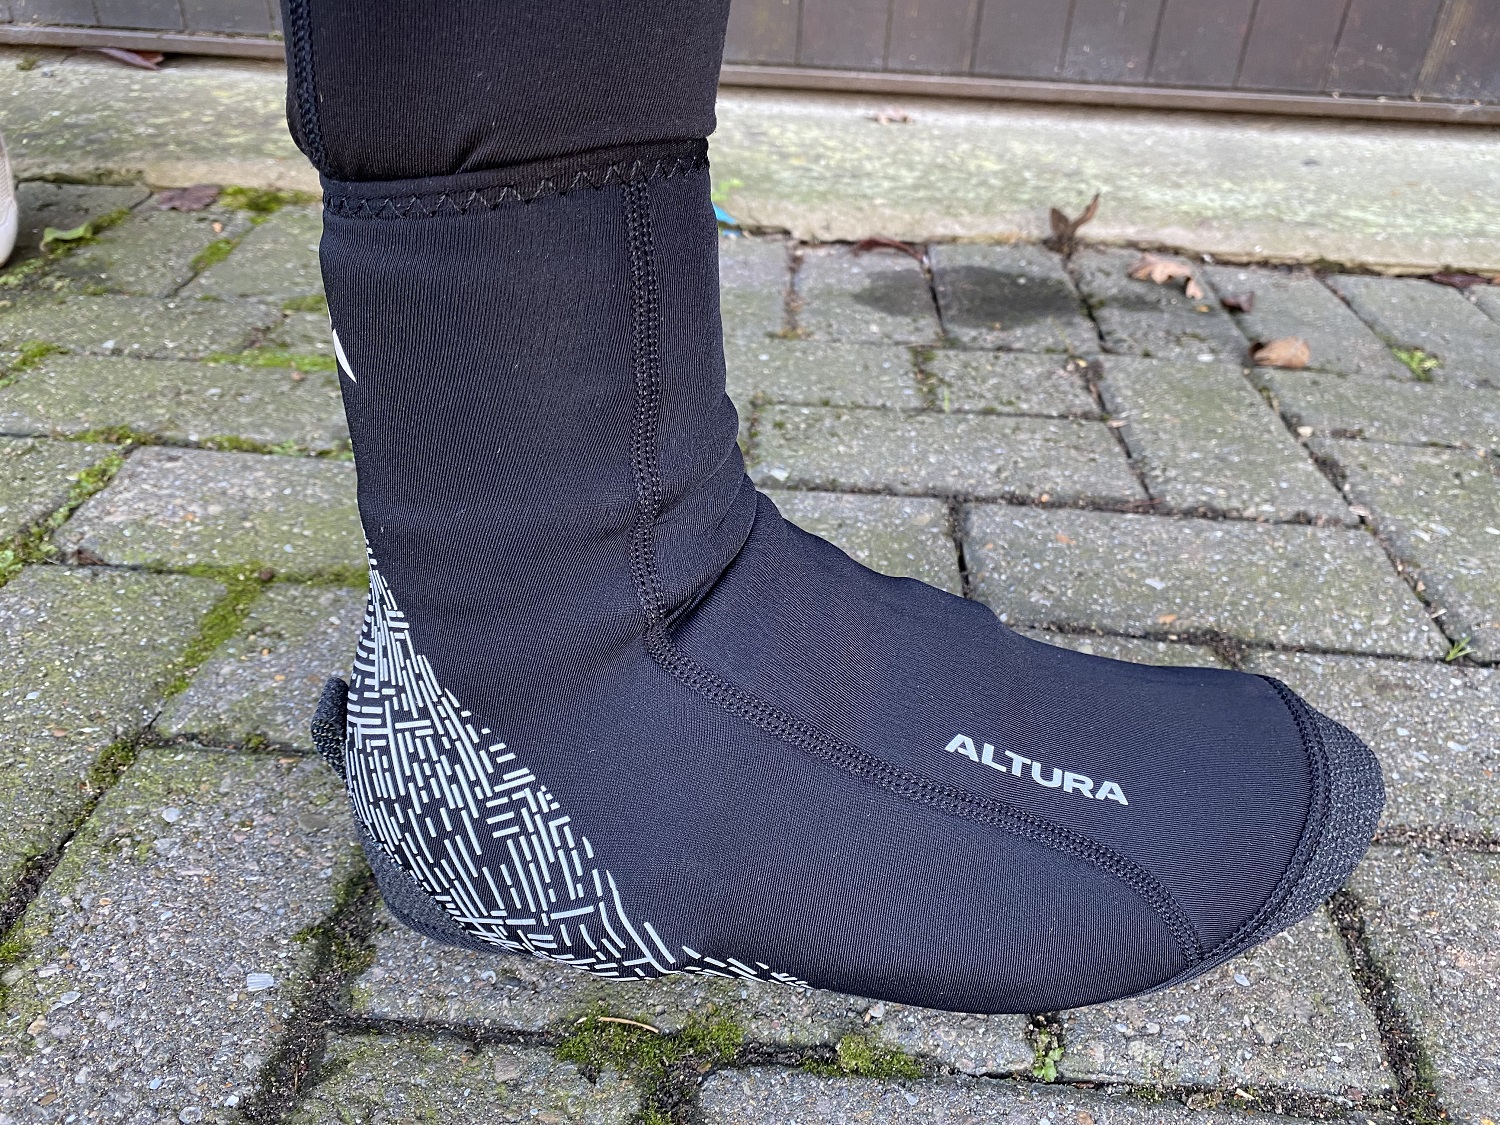 Rider wearing the Altura Thermostretch Windproof overshoes.